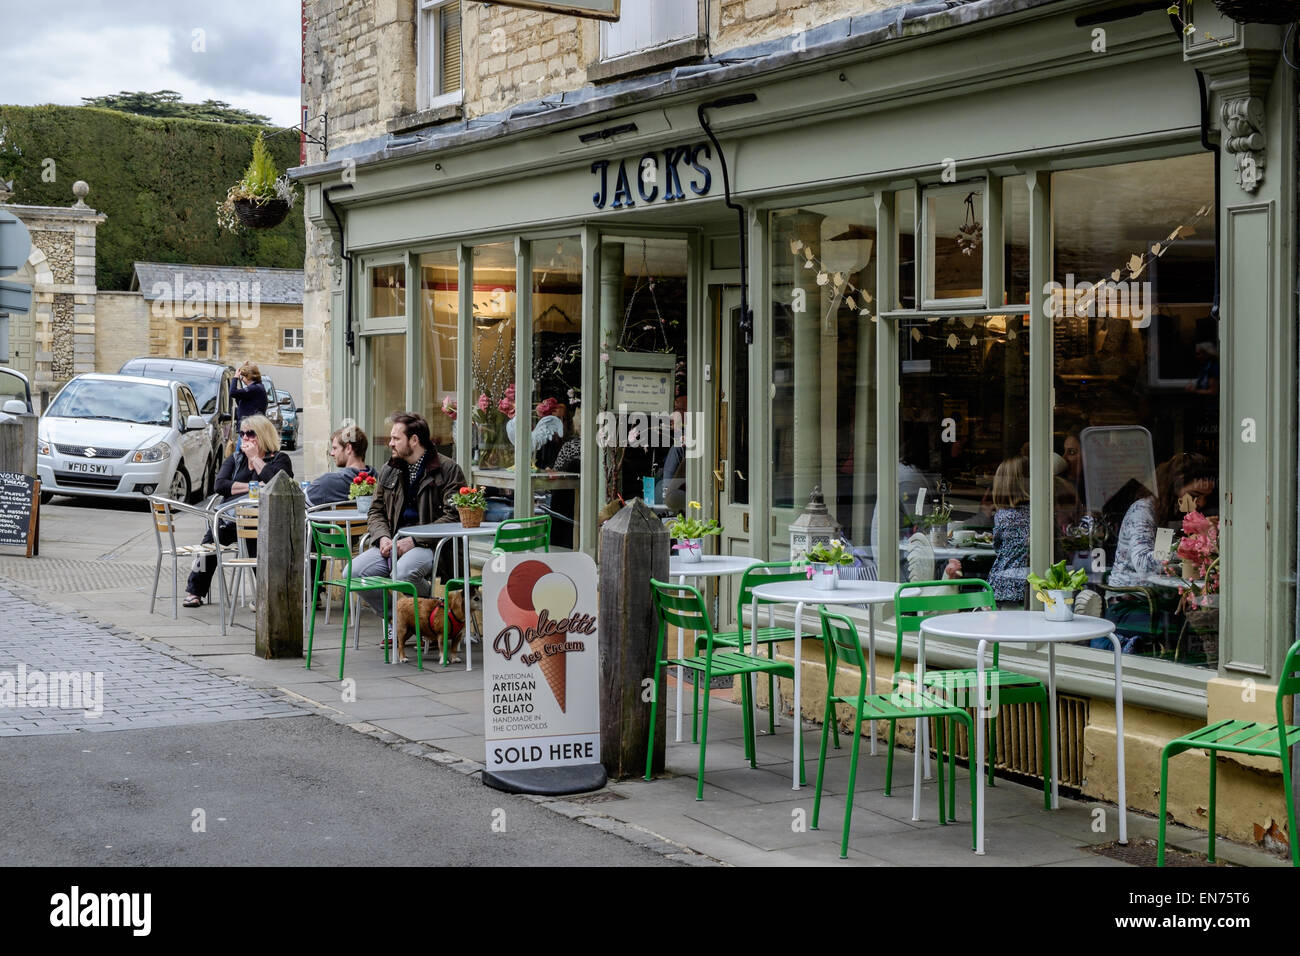 A street scene outside Jack's Coffee House in Cirencester, Gloucestershire, UK. There are customers, tables and chairs outside Stock Photo